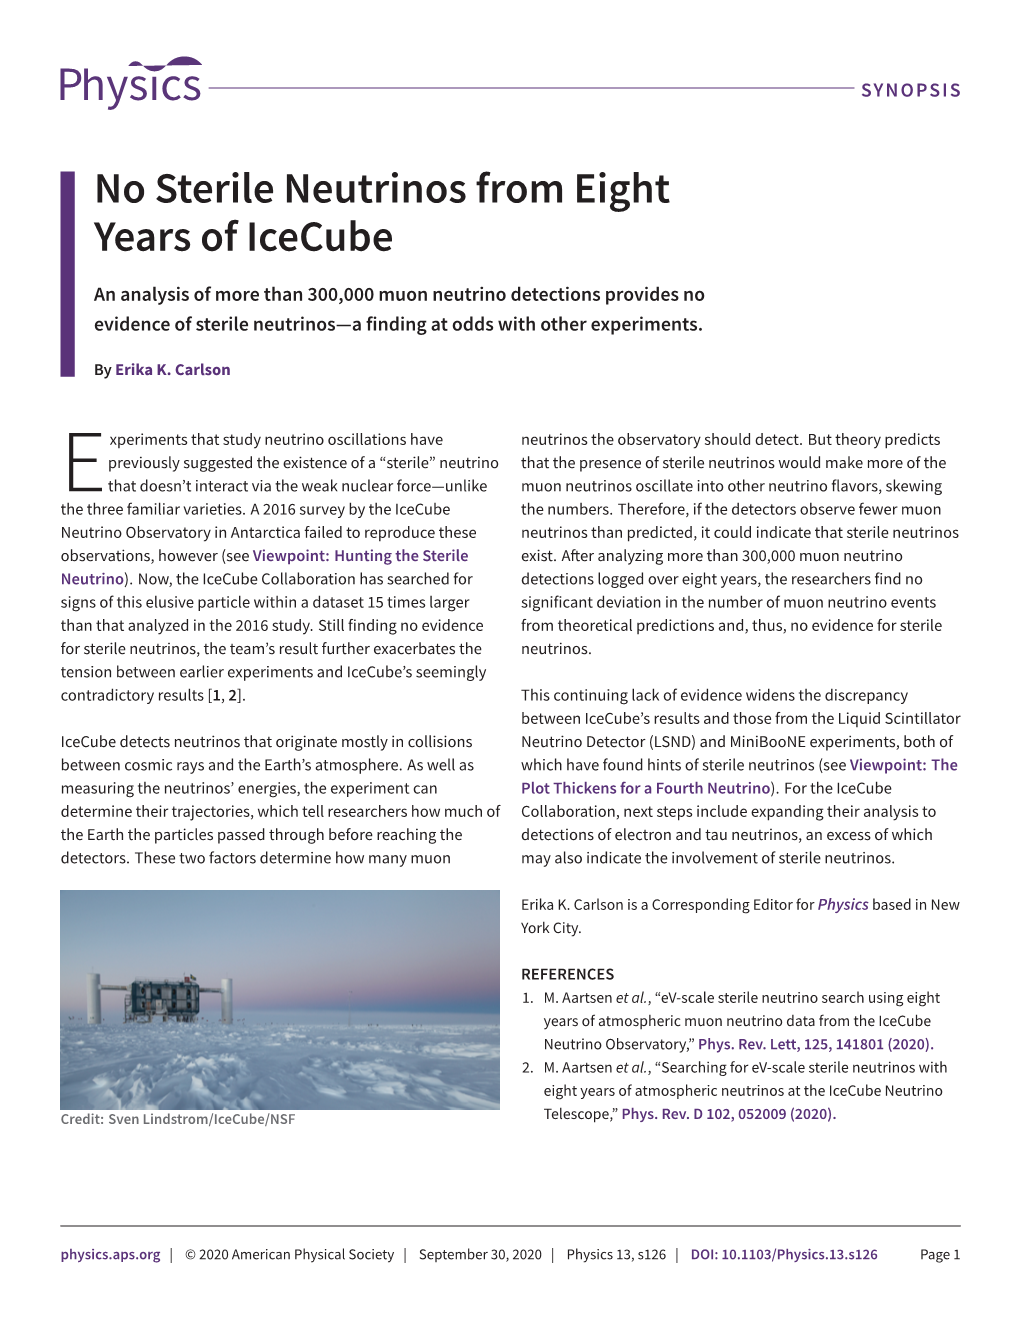 No Sterile Neutrinos from Eight Years of Icecube